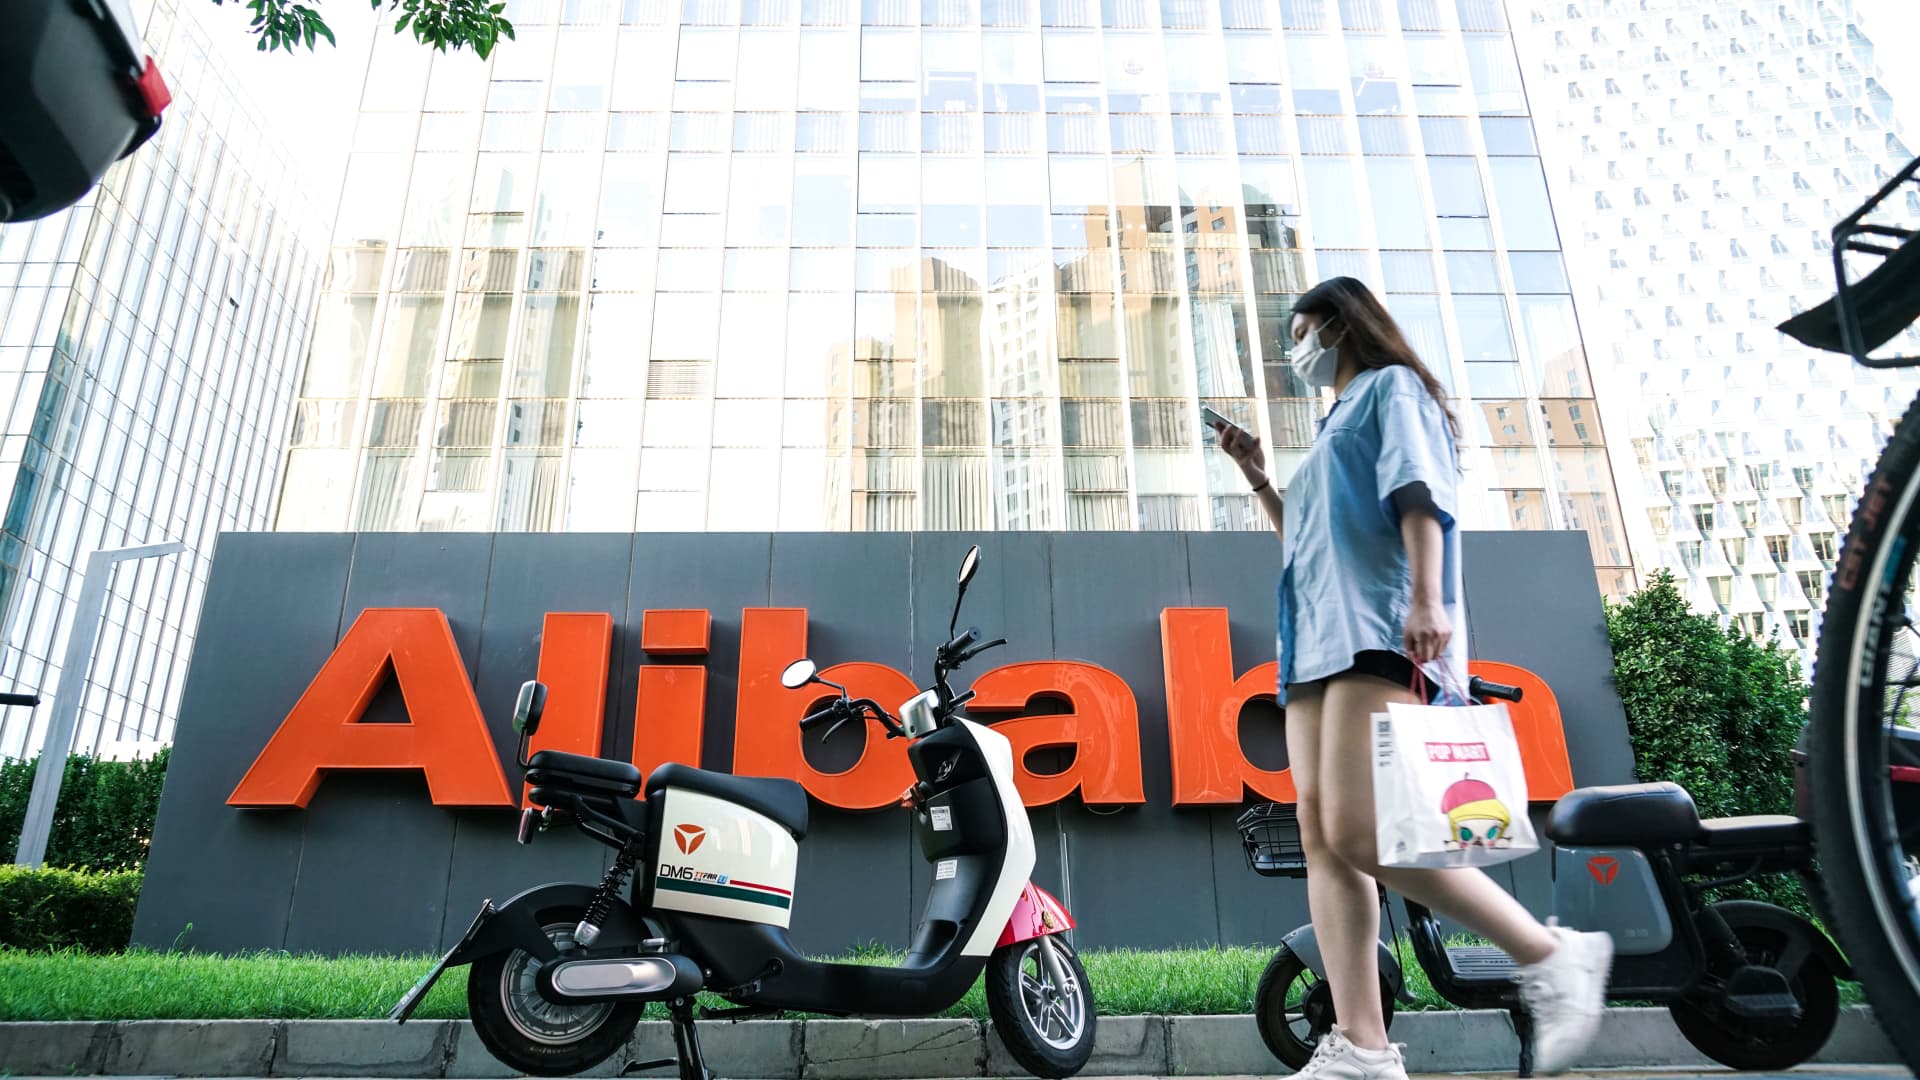 China's Alibaba and Tencent focus on cost cuts amid slowing growth